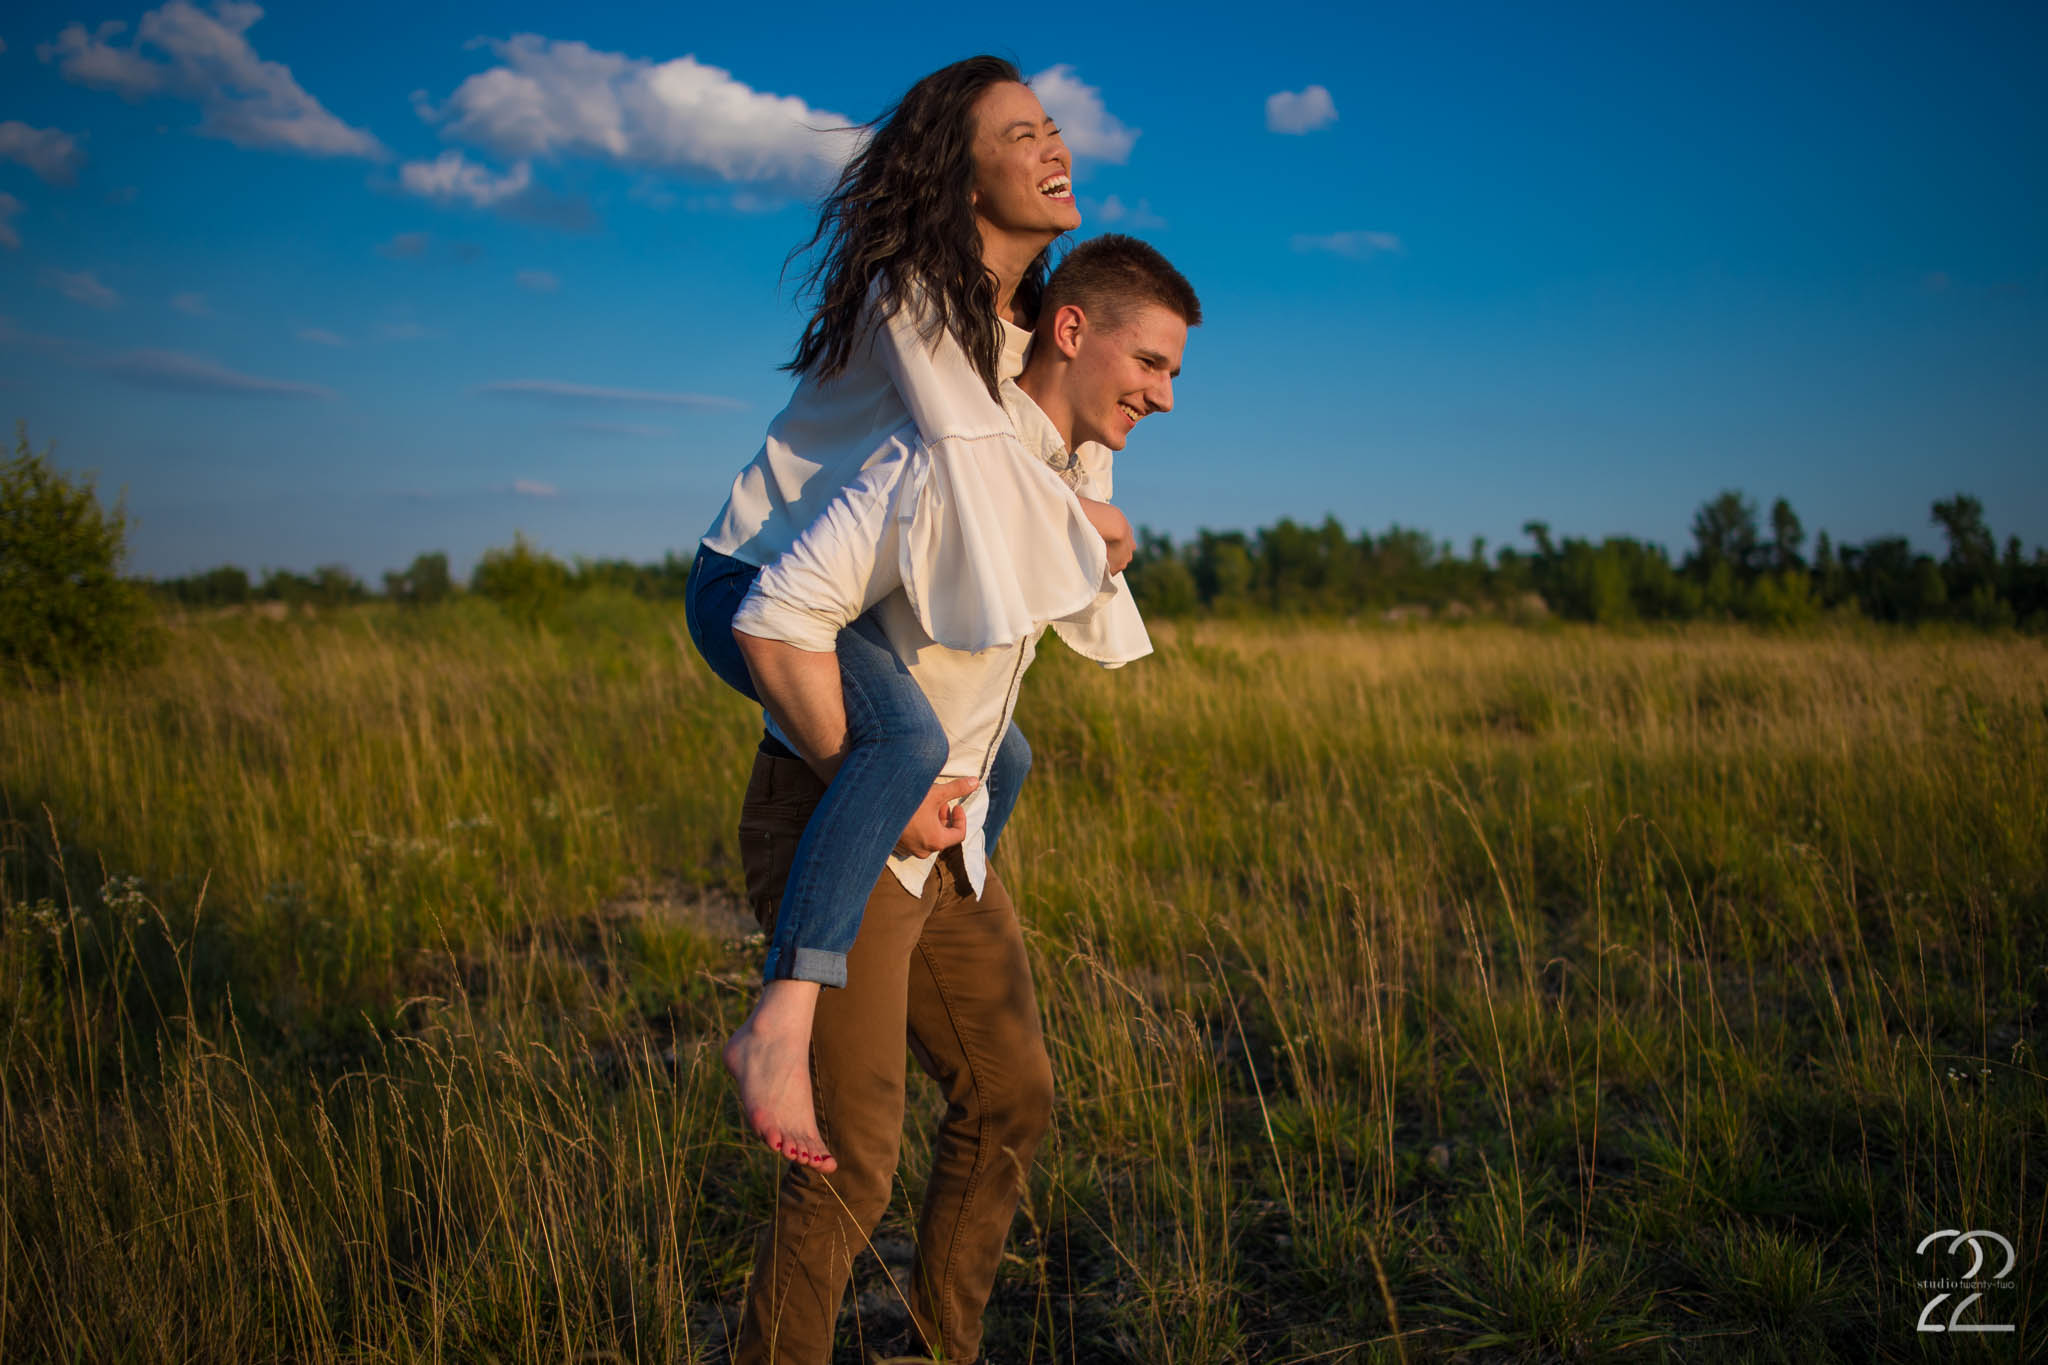 Woman rides piggy back on a man's back, laughing as they run through a field with a blue sky behind them at Oakes Quarry Park by Dayton Wedding Photographer Studio 22 Photography